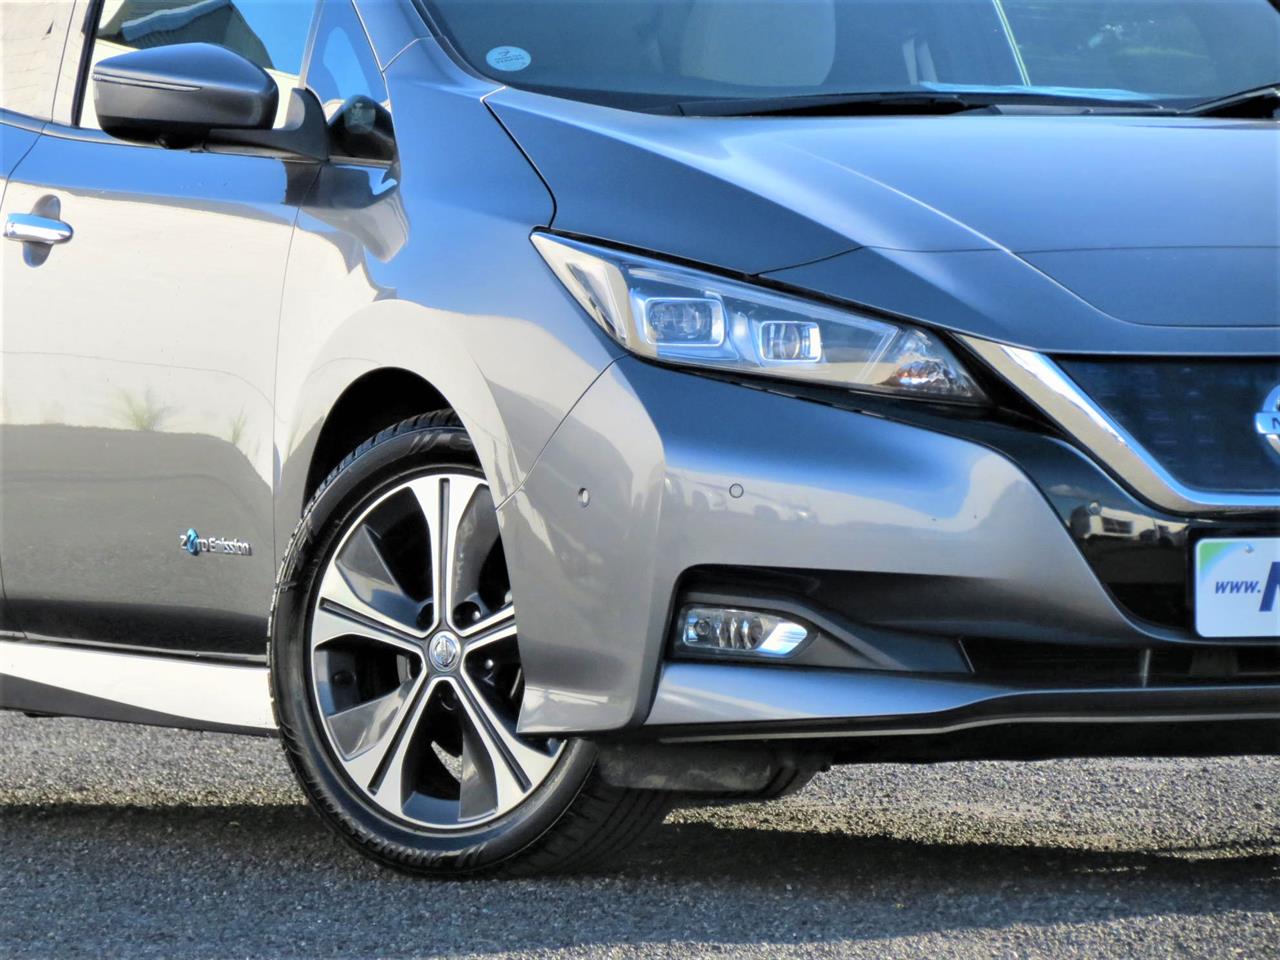 2018 Nissan Leaf only $86 weekly